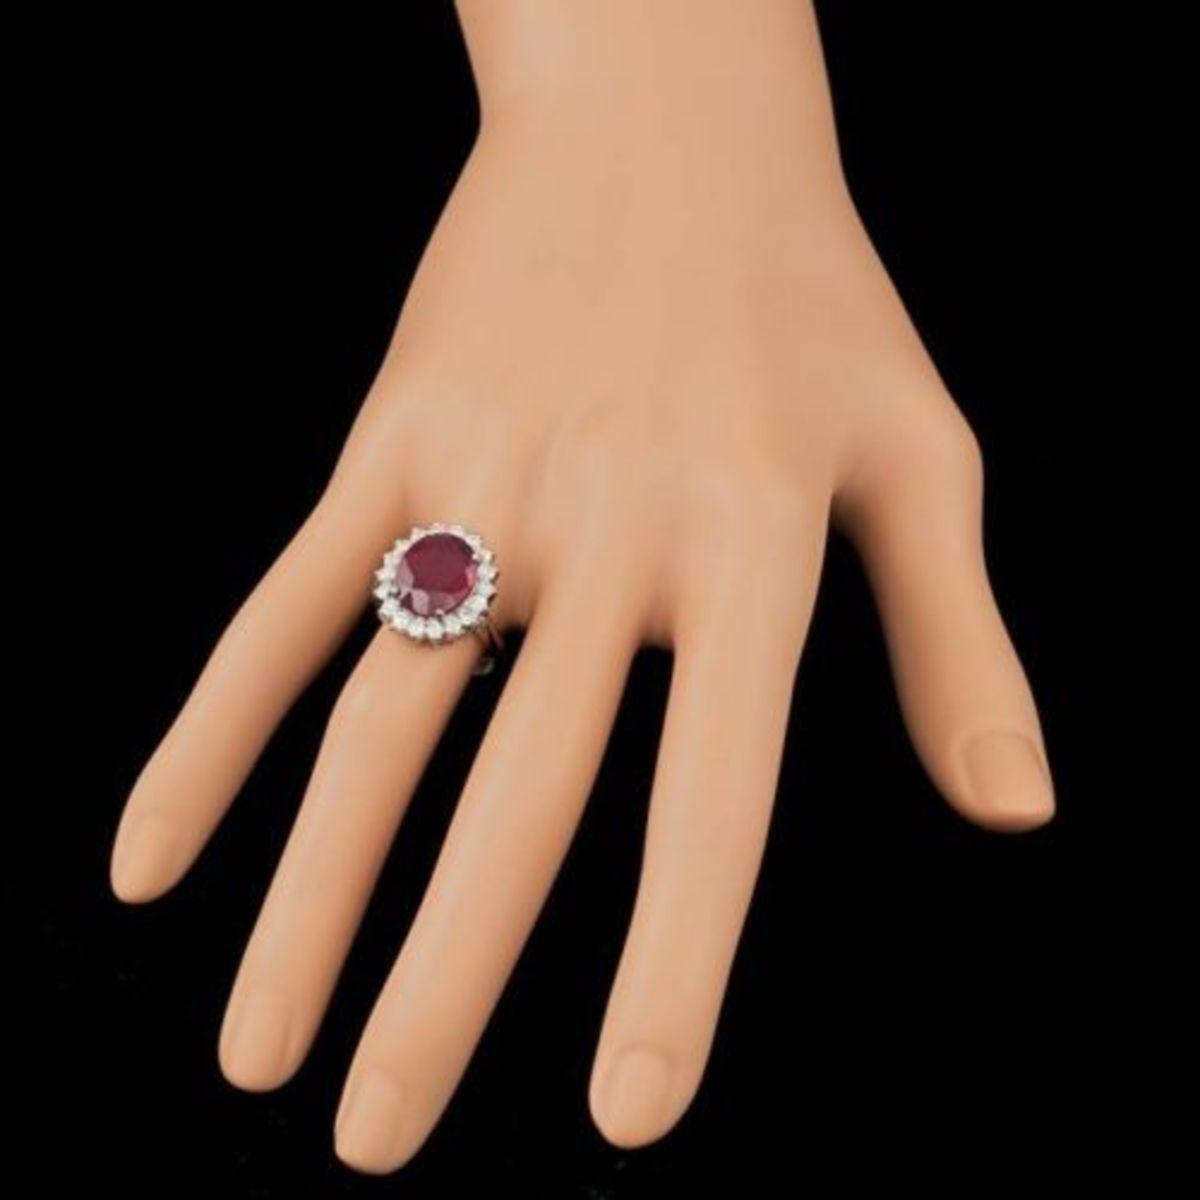 14K White Gold 4.96ct Ruby and 0.87ct Diamond Ring